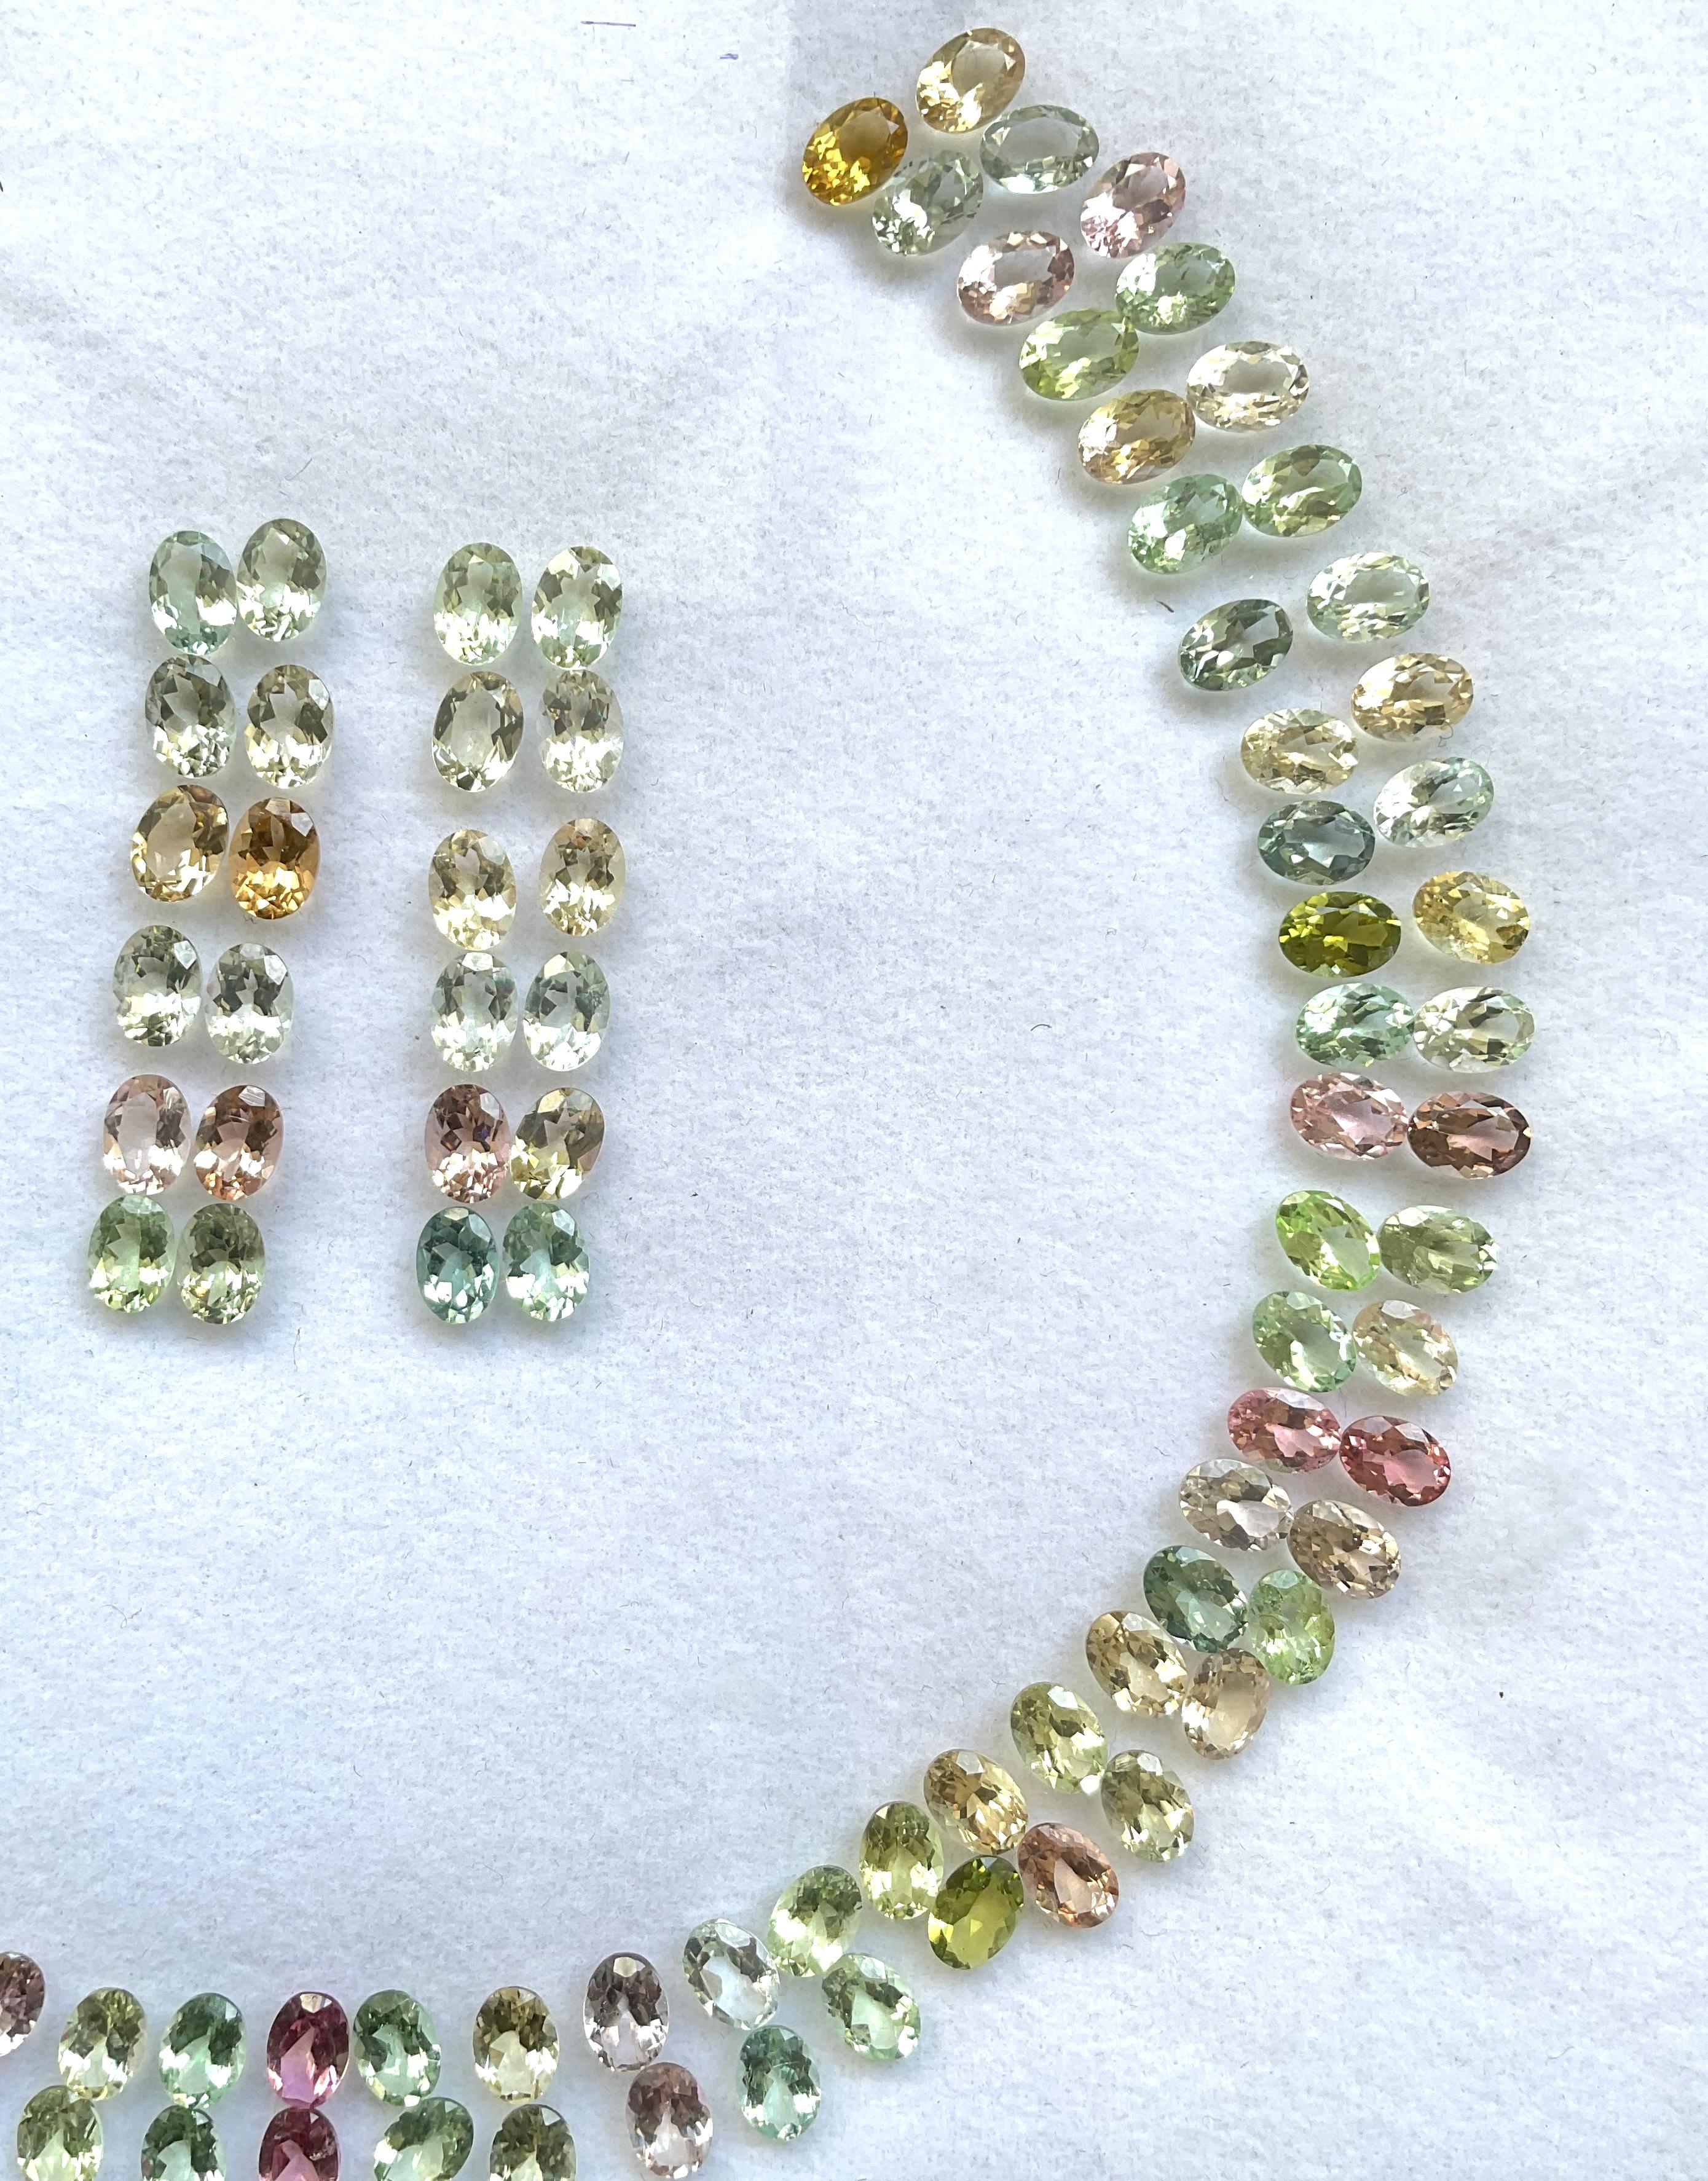 Oval Cut 98.15 Carats Oval Tourmaline Layout Suite Faceted Cut Stones Natural Gems For Sale